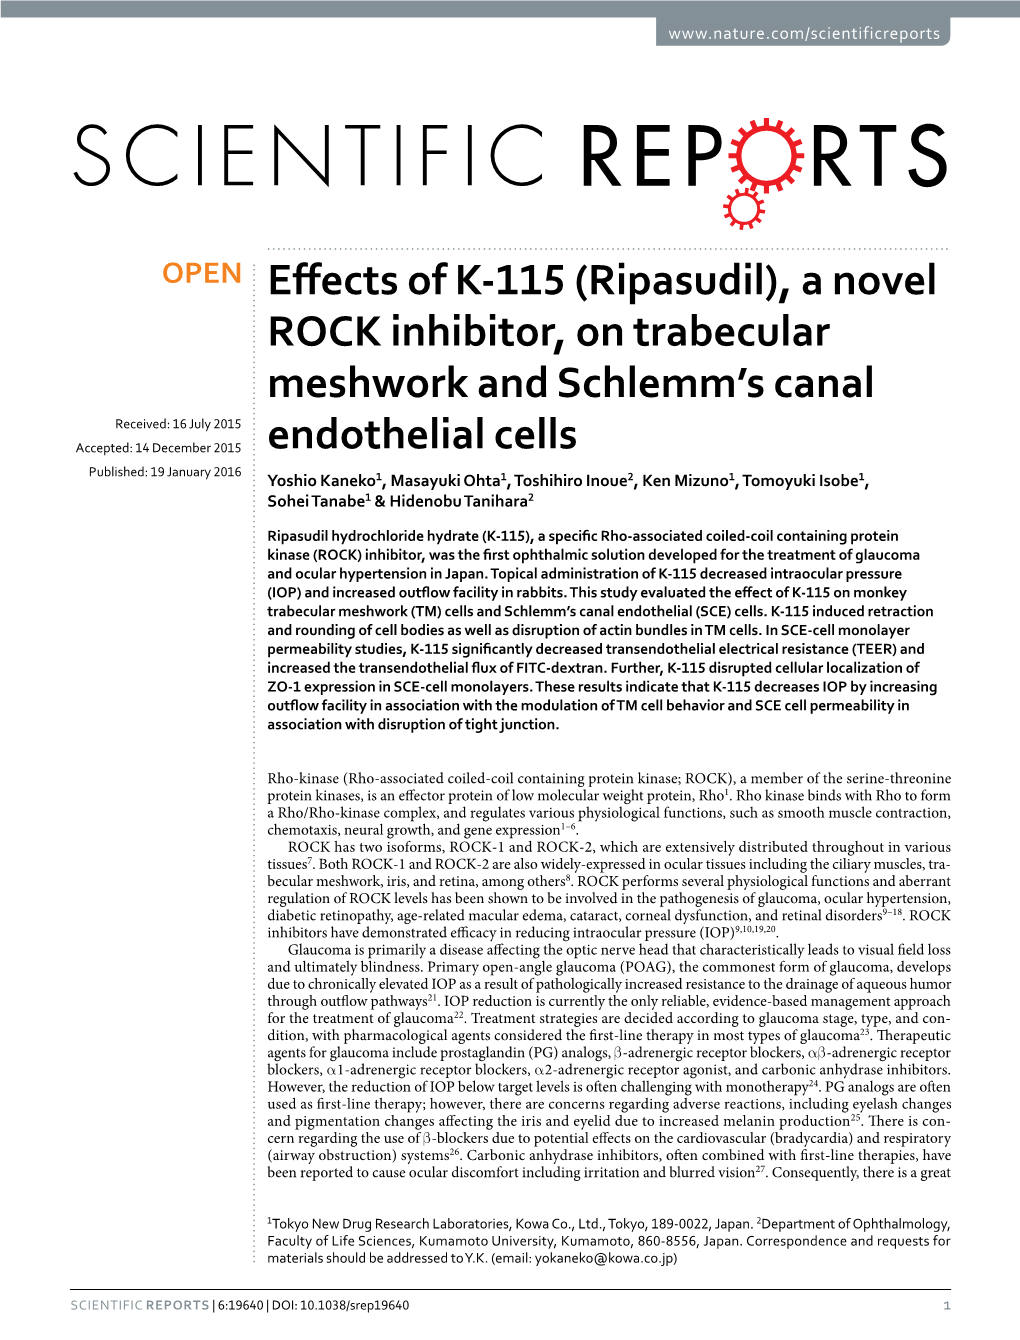 A Novel ROCK Inhibitor, on Trabecular Meshwork and Schlemm's Canal Endothelial Cells